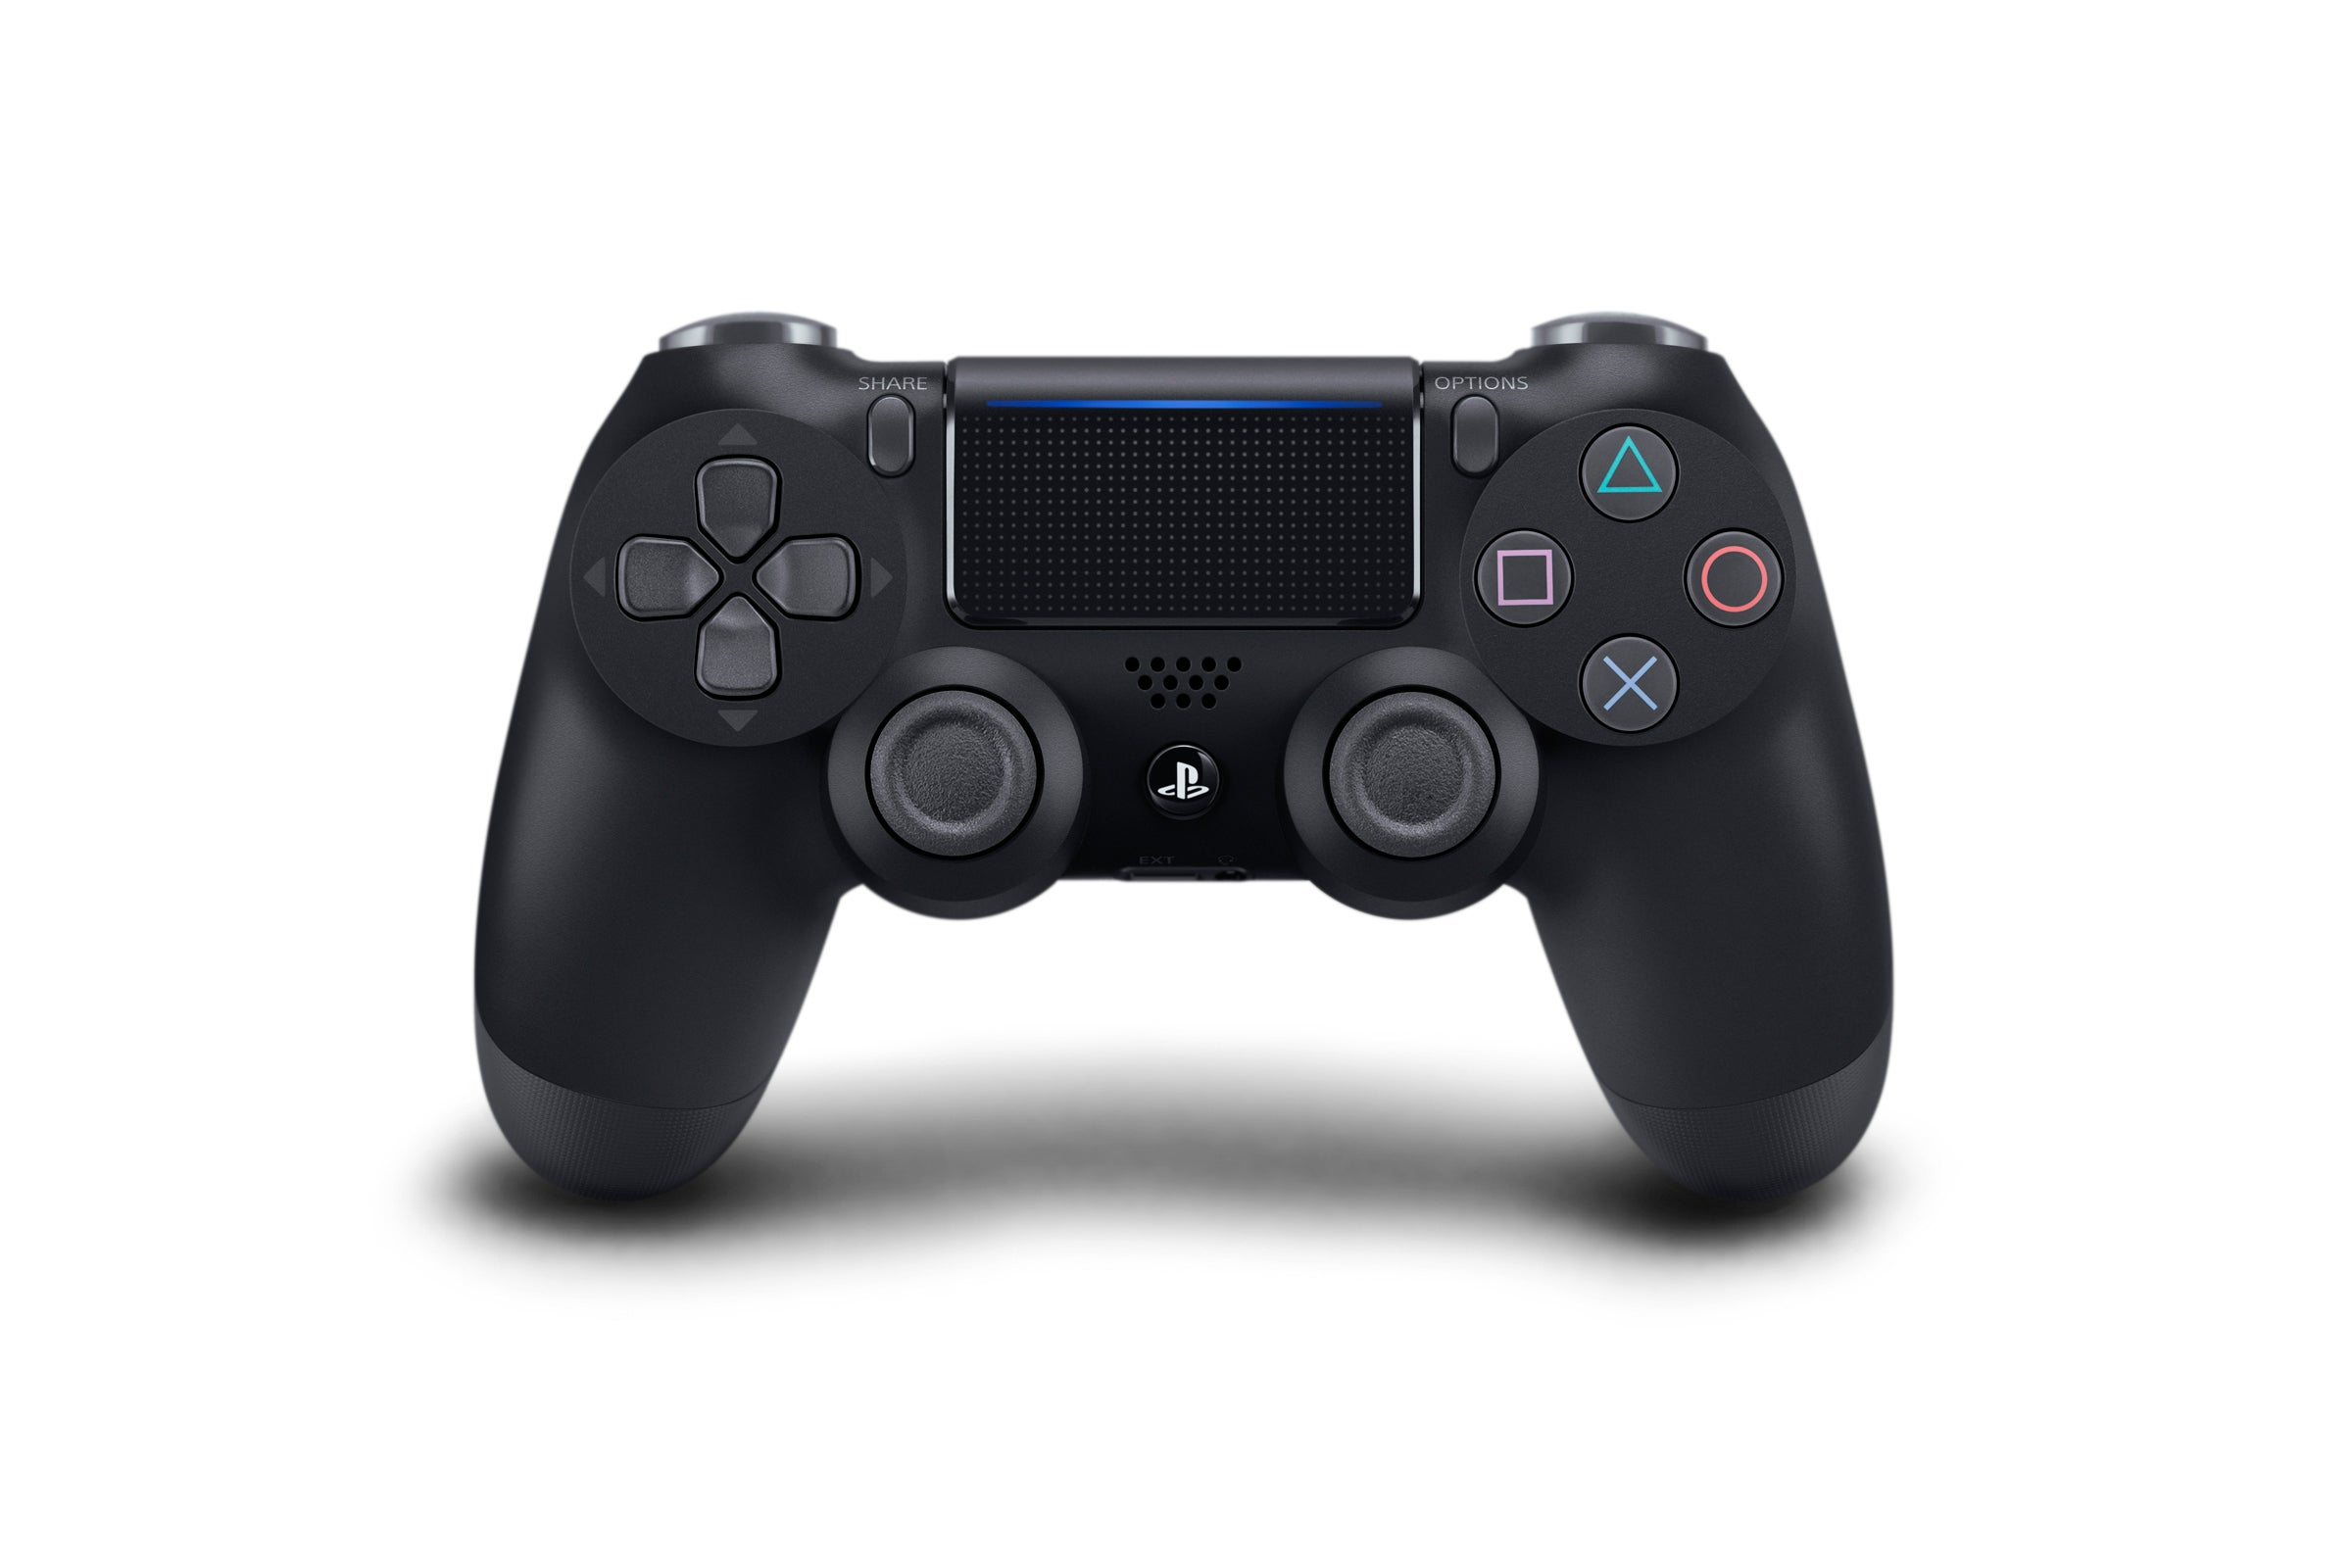 Image for Here's a look at the new DualShock4, PlayStation Camera and Vertical Stand for PS4 Pro and Slim